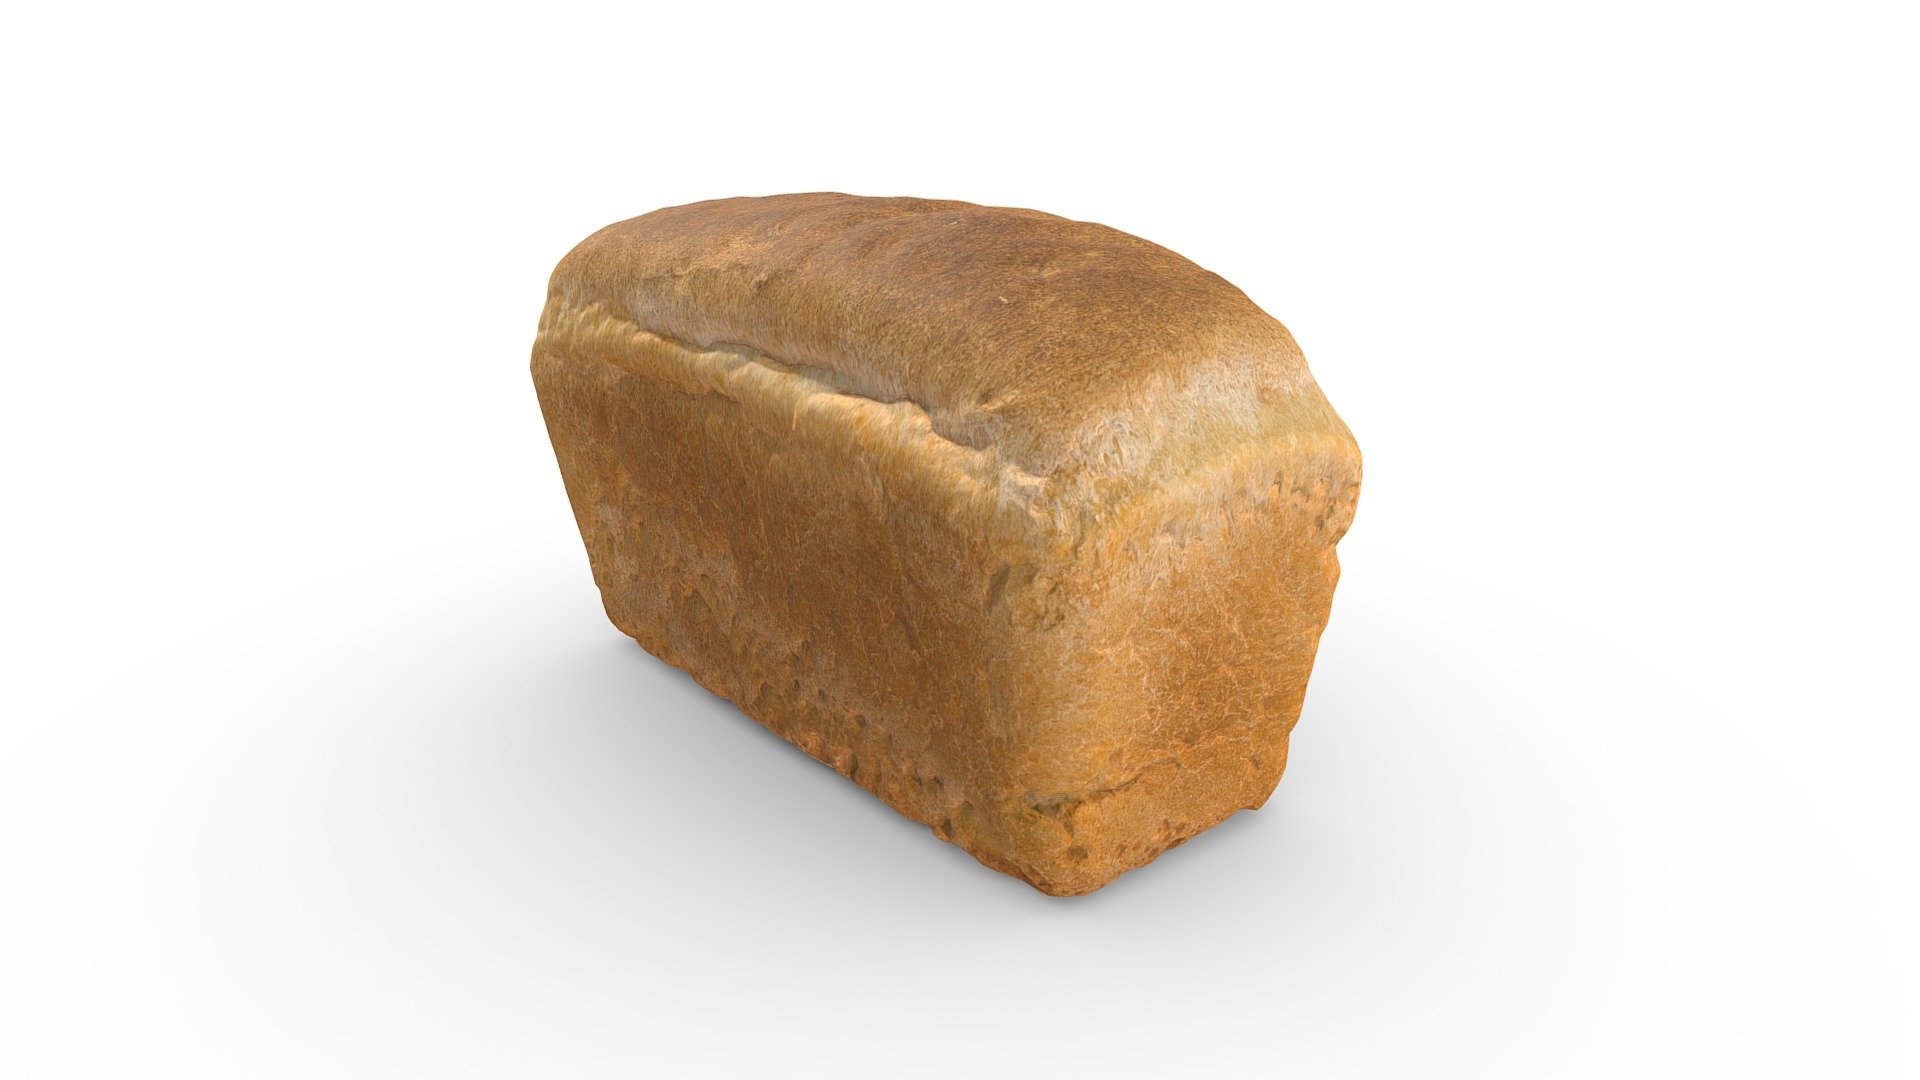 High-poly loaf of wheat bread photogrammetry scan. PBR texture maps 4096x4096 px. resolution for metallic or specular workflow. Scan from real food, high-poly 3D model, 4K resolution textures. Additional file contains source PNG texture maps.

Additional texture maps: AmbientOcclusion, BaseColor, Diffuse, Glossiness, Height, Metallic, MetallicSmoothness, Normal, Roughness, Specular, SpecularLevel, SpecularSmoothness 3d model